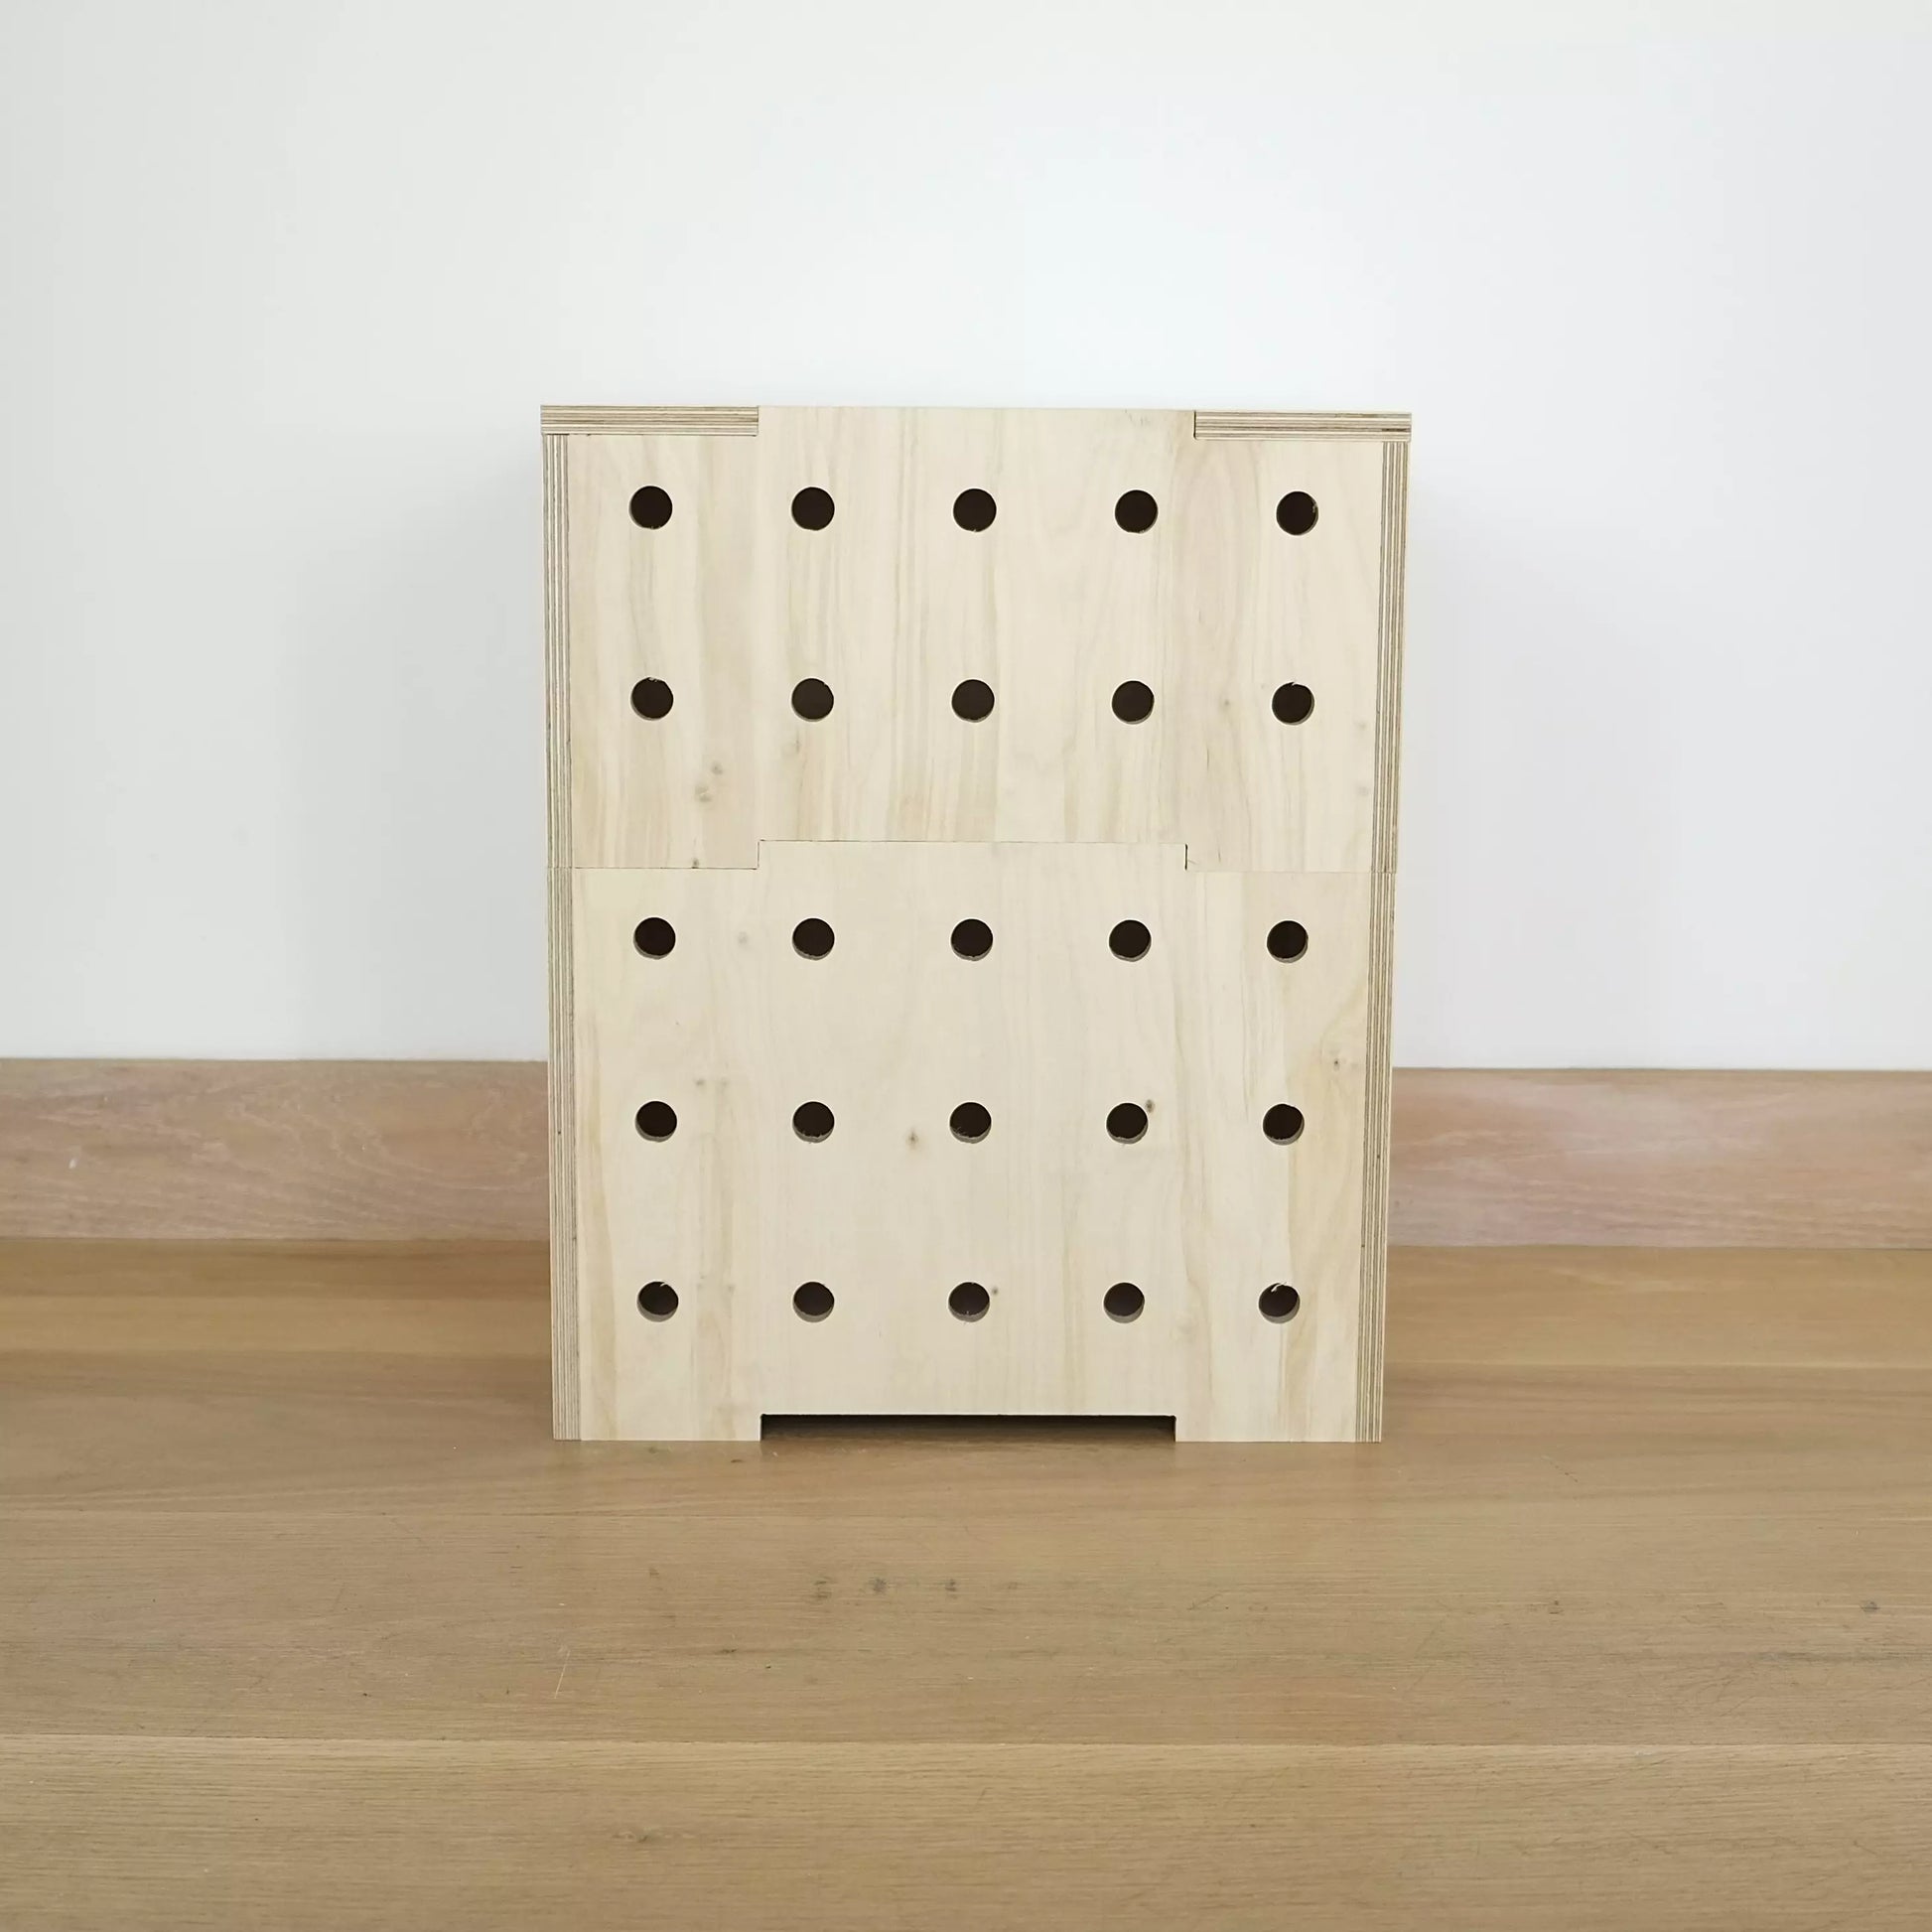 Stack of two simple pale wooden square shaped storage crates facing front on, with five rows of holes cut in the front facet and a wooden lid, sitting on a wooden floor.